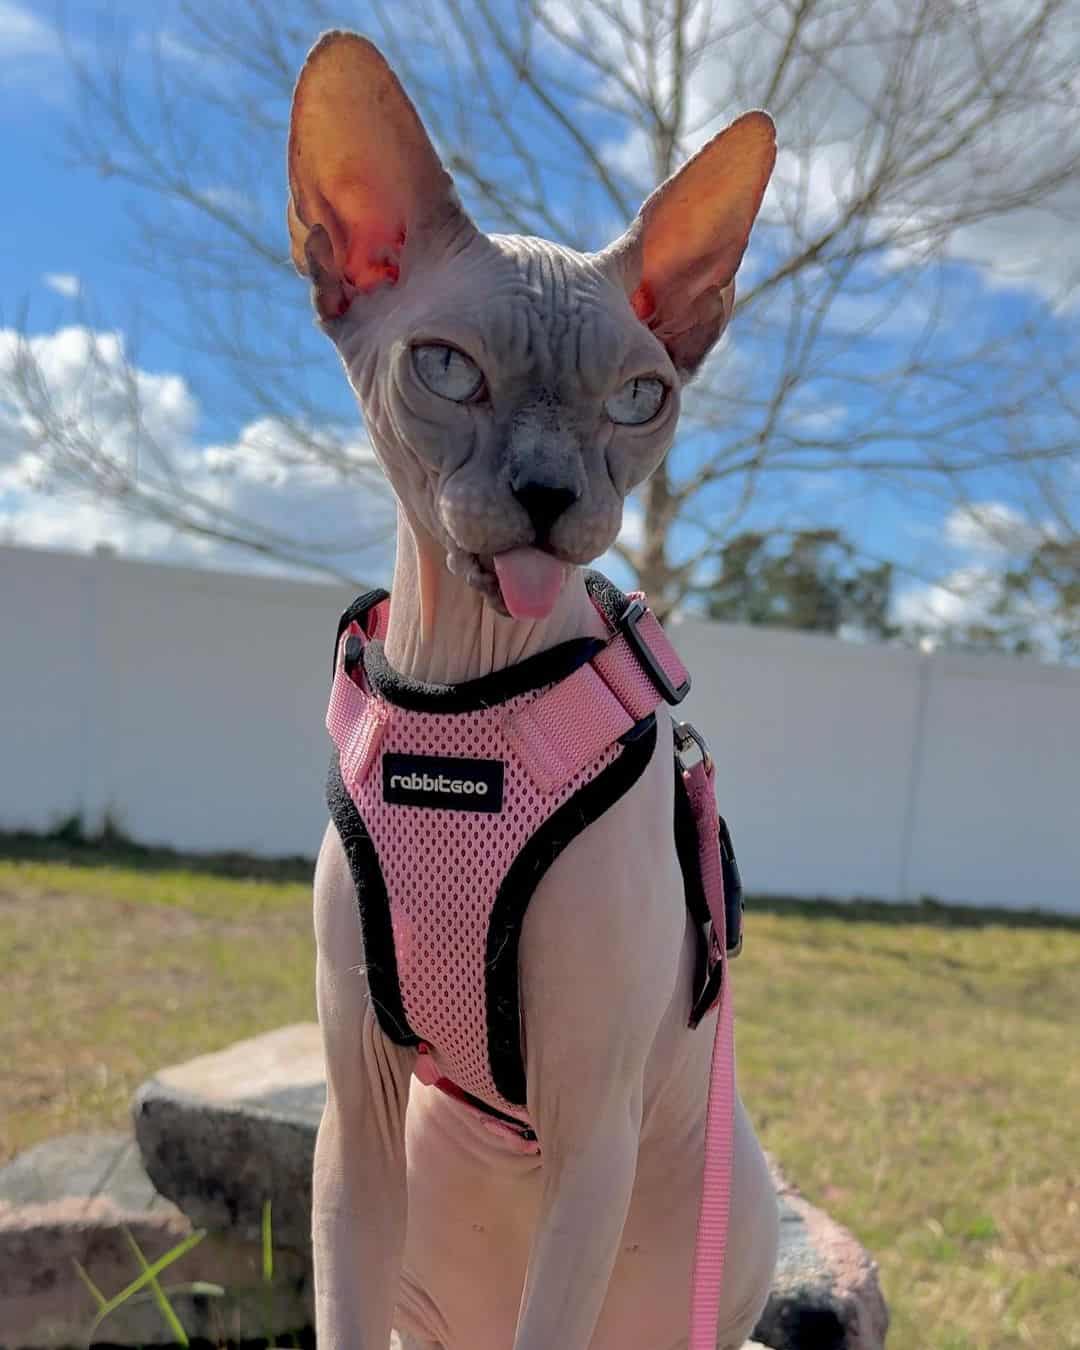 sphynx cat with tongue out